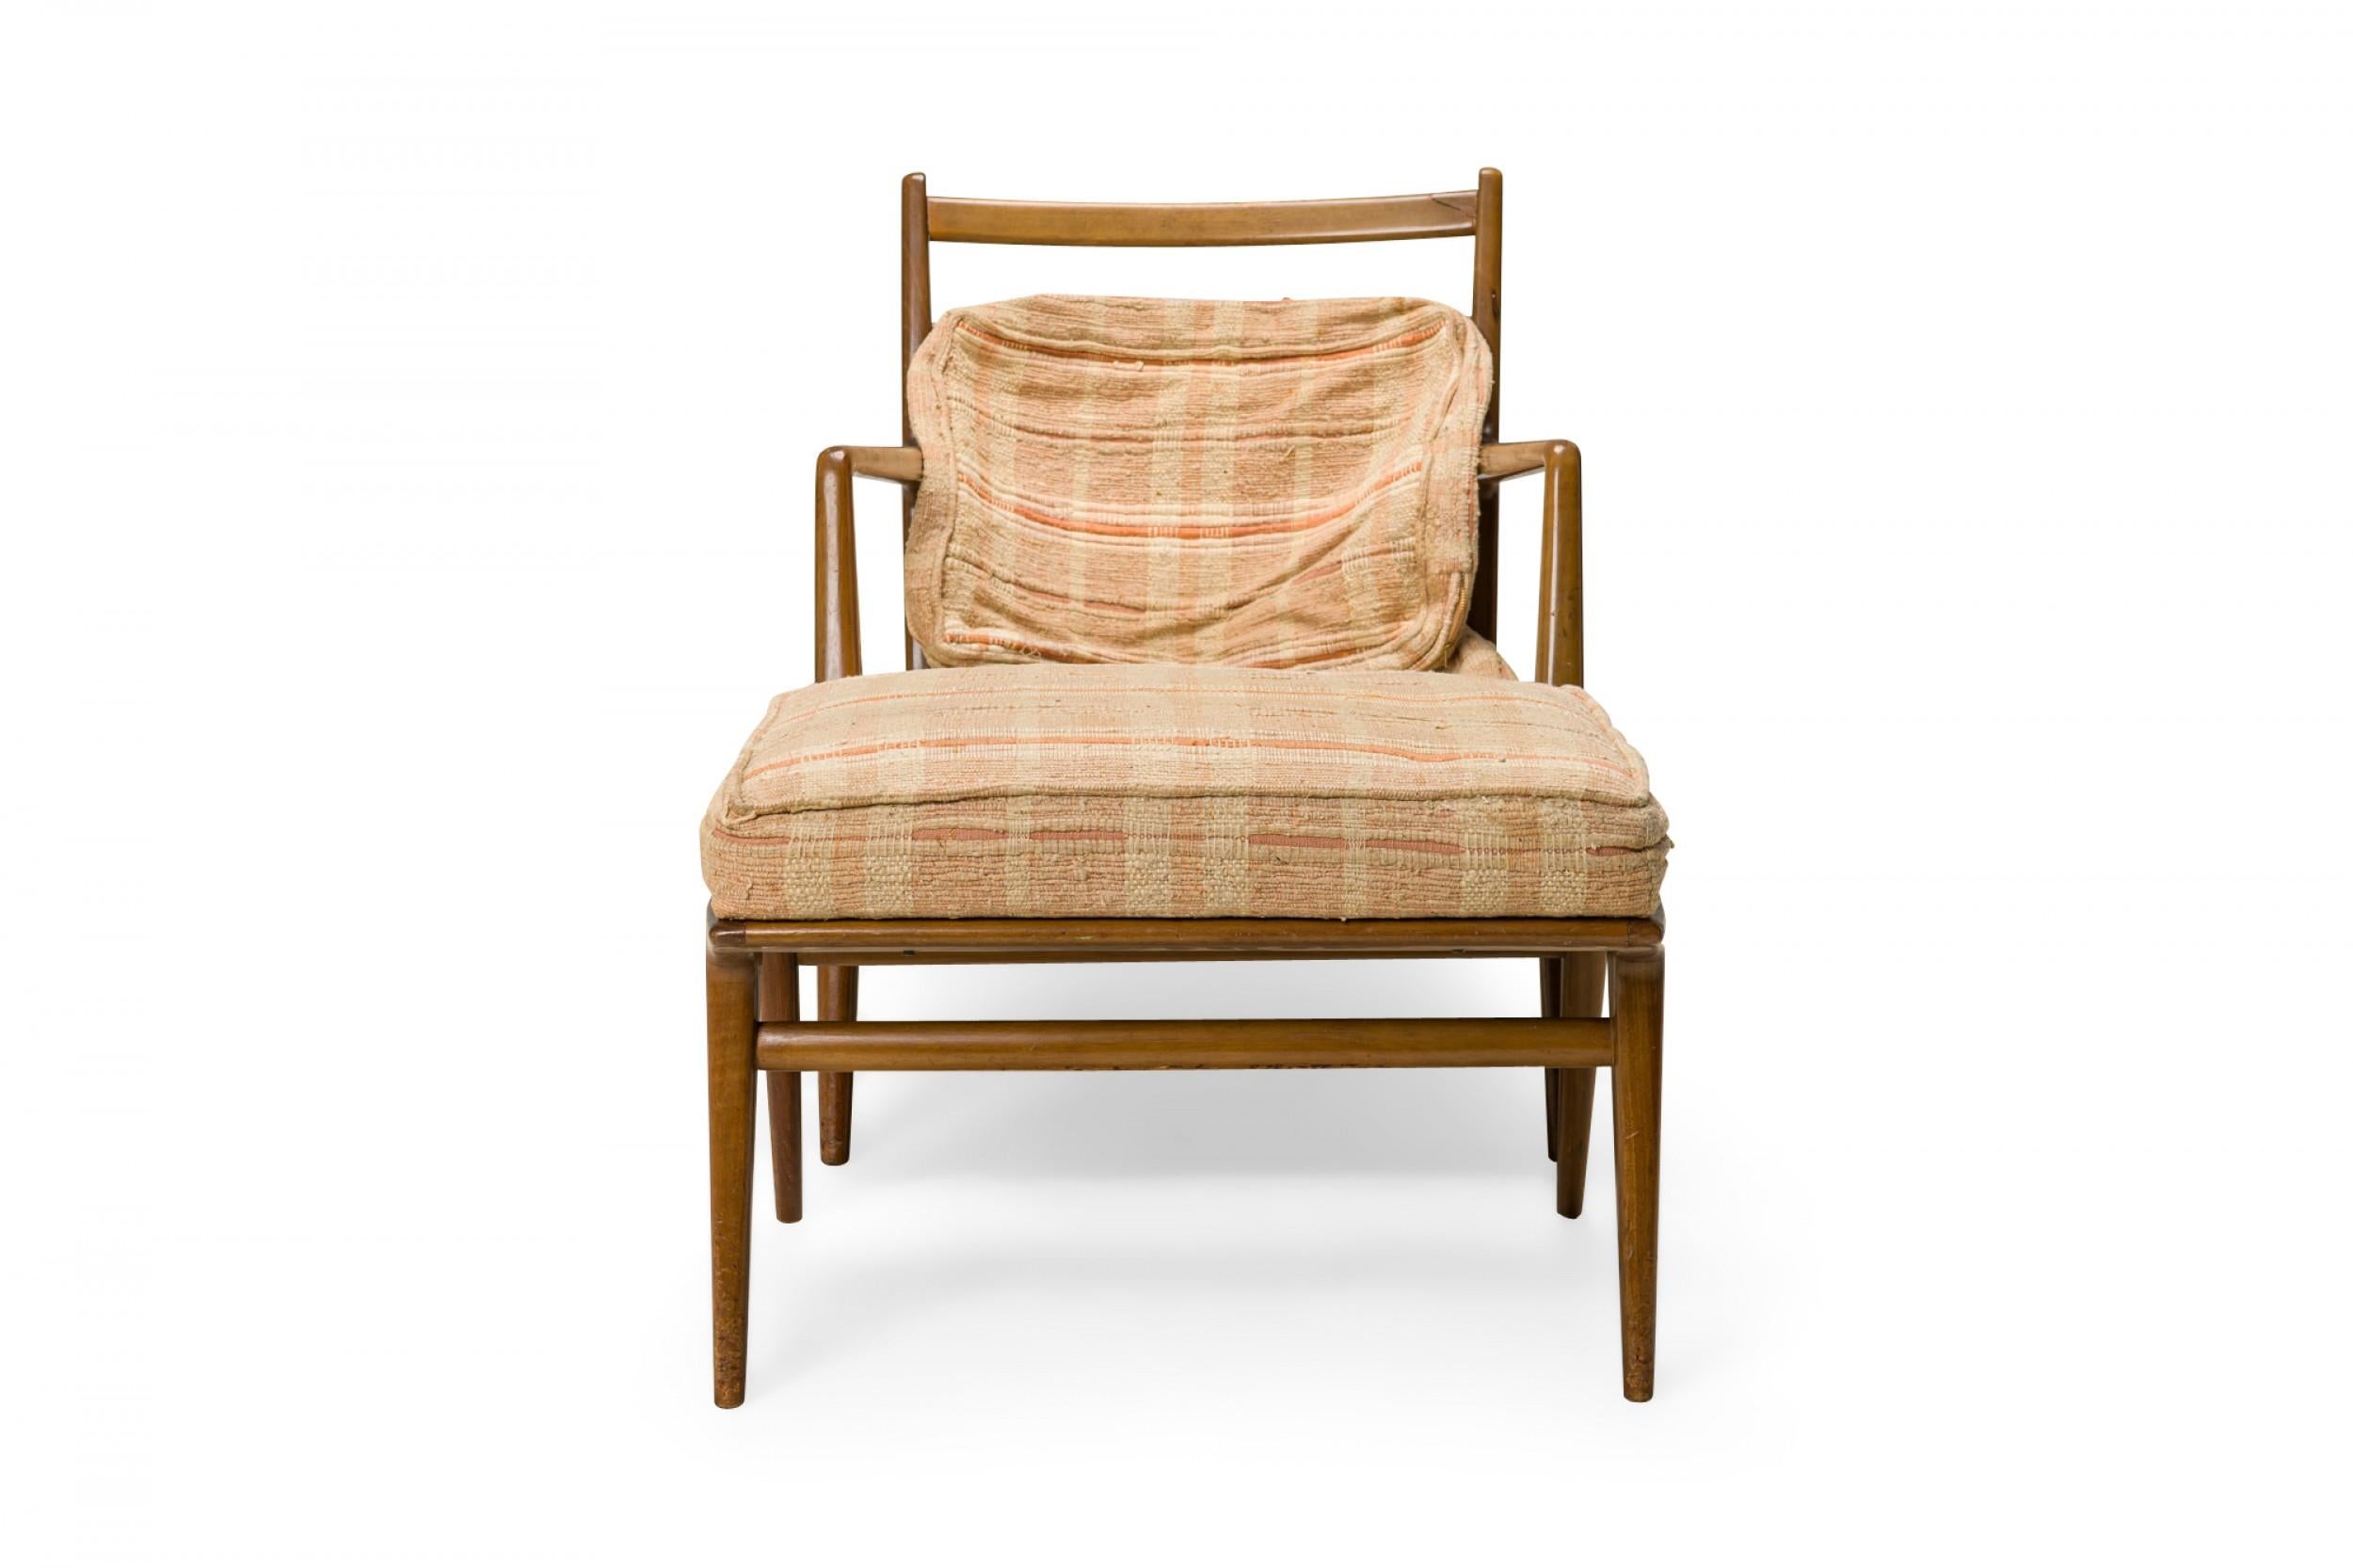 Bertha Schaefer for Singer & Sons Beige Plaid and Walnut Lounge Chair In Good Condition For Sale In New York, NY